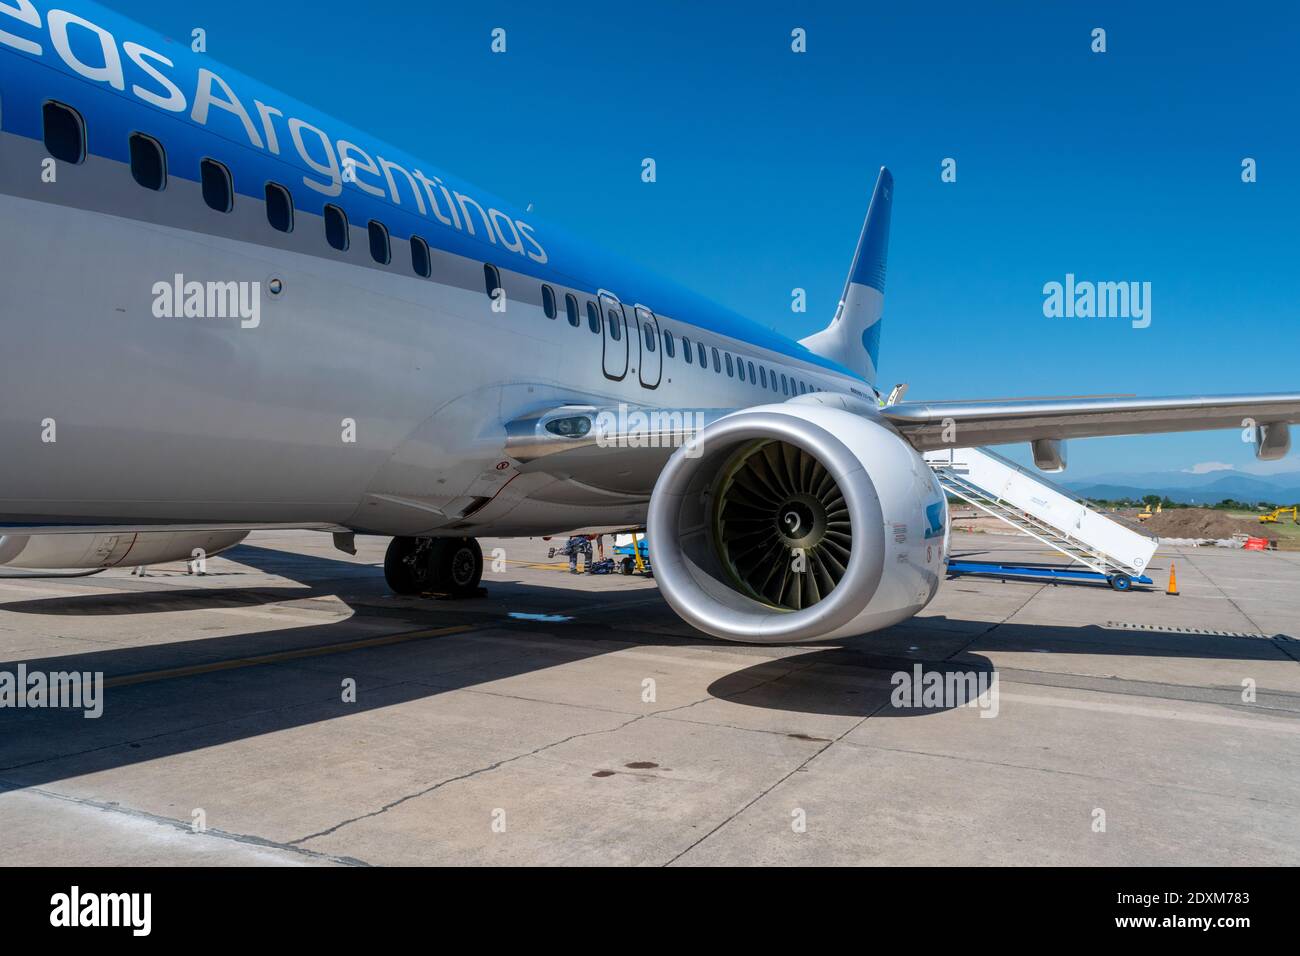 JUJUY, ARGENTINA - Jul 08, 2020: aerolineas argentinas airplane boeing b737 800 at the airport Stock Photo